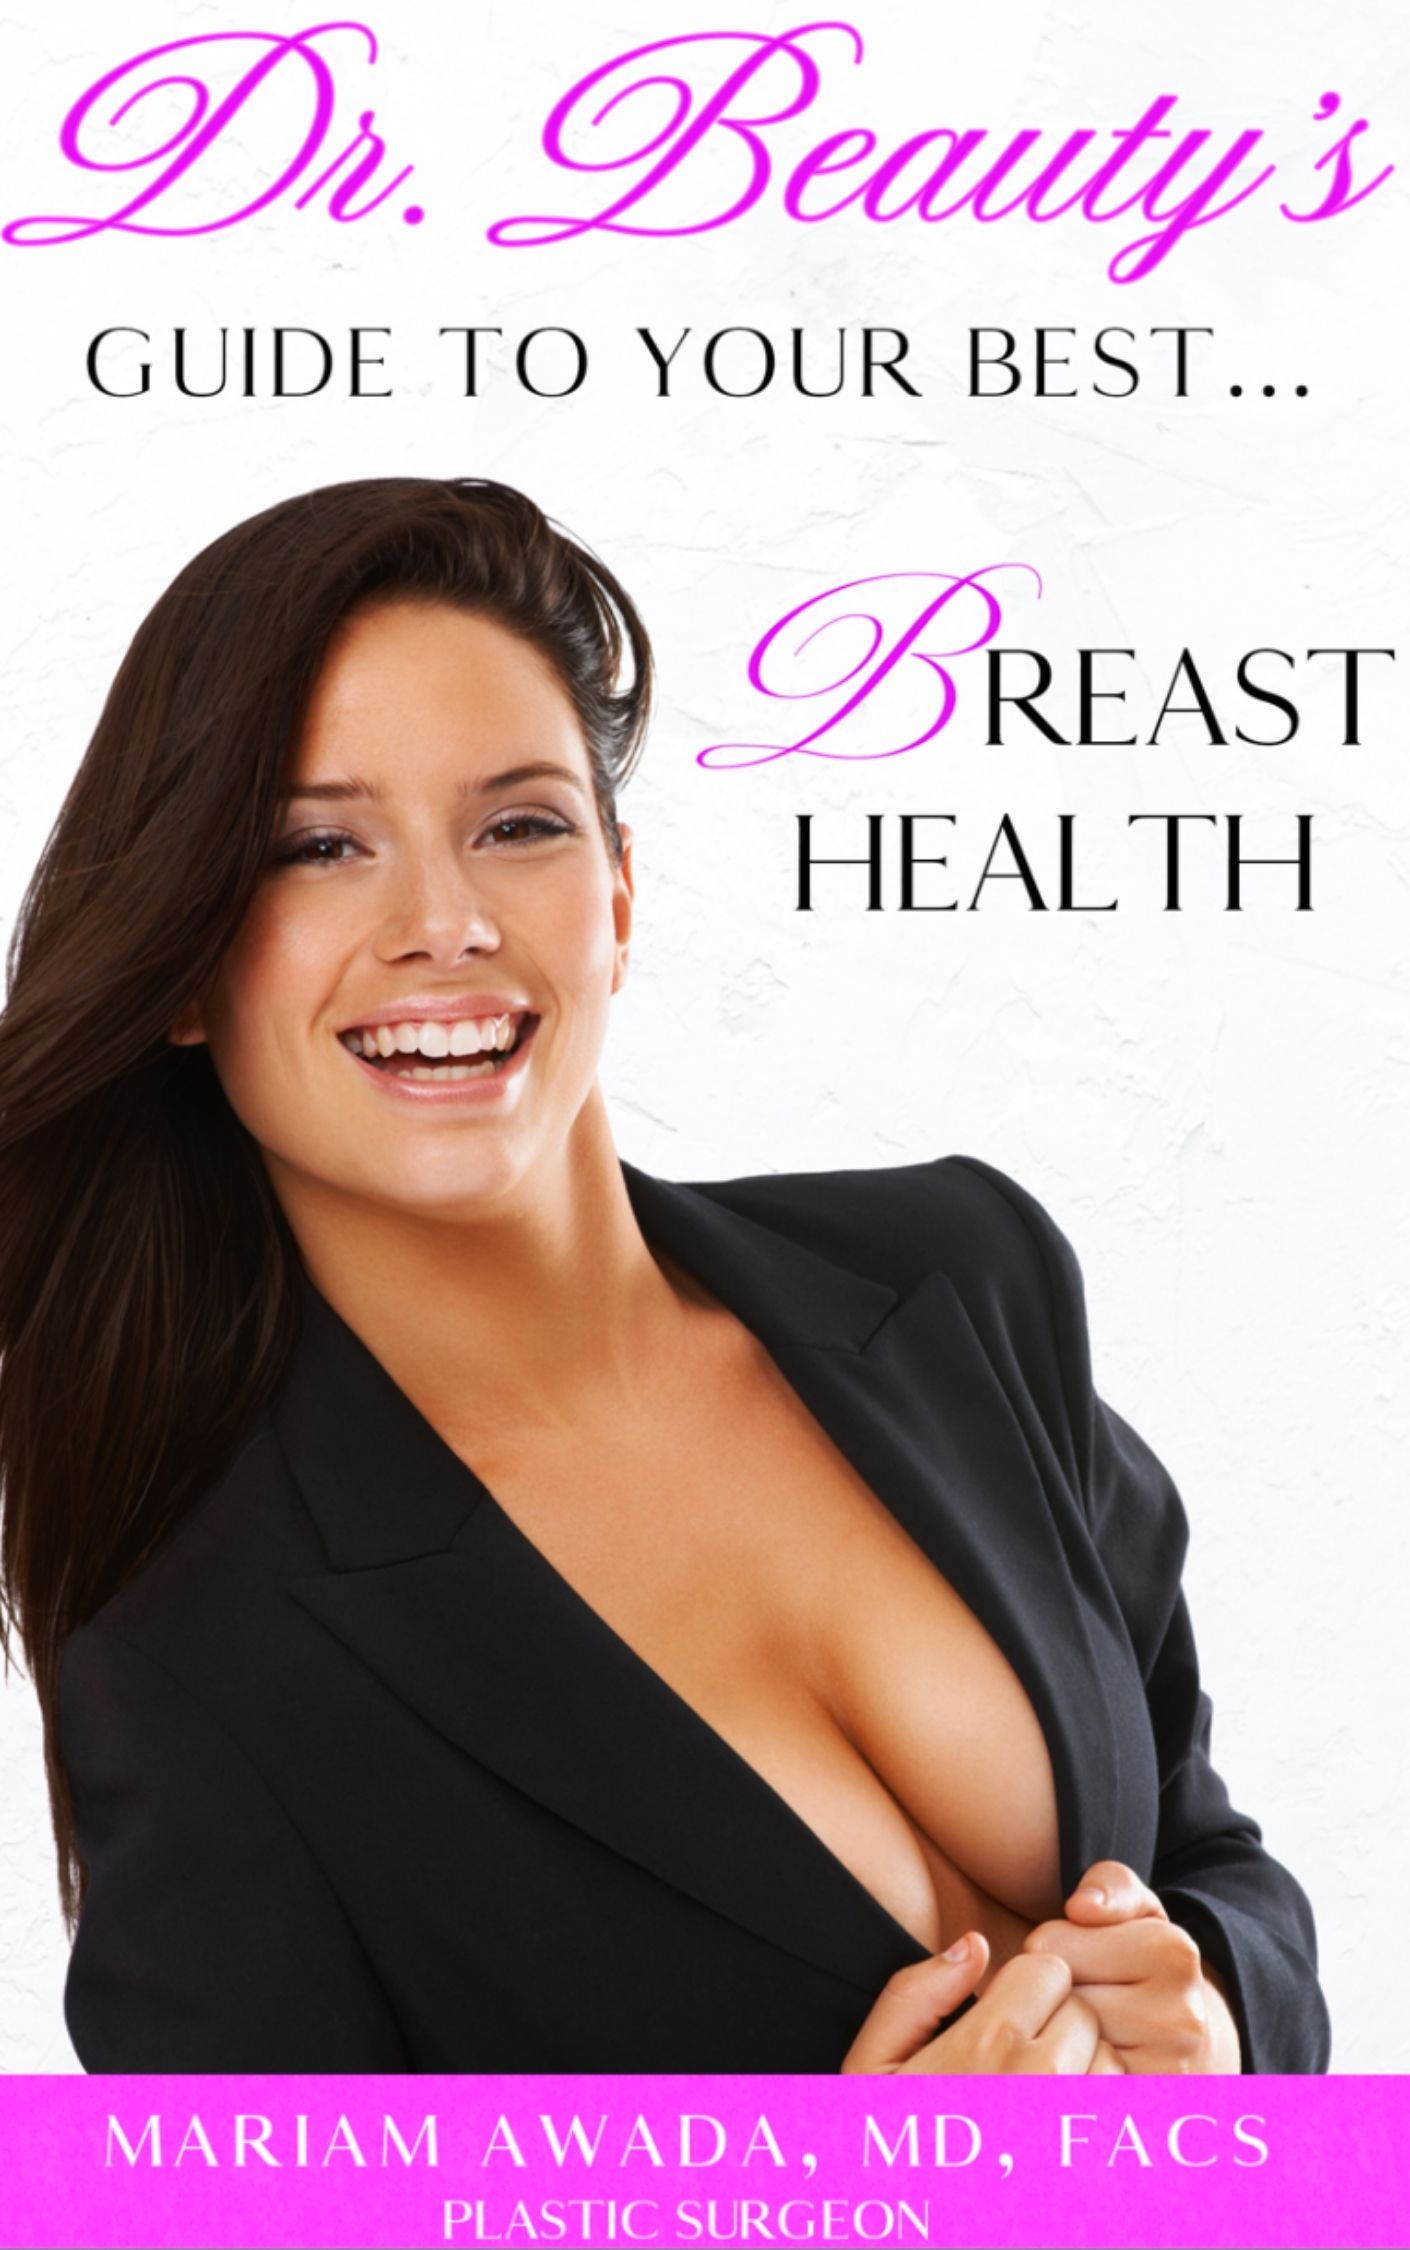 Dr. Beauty Breast Health